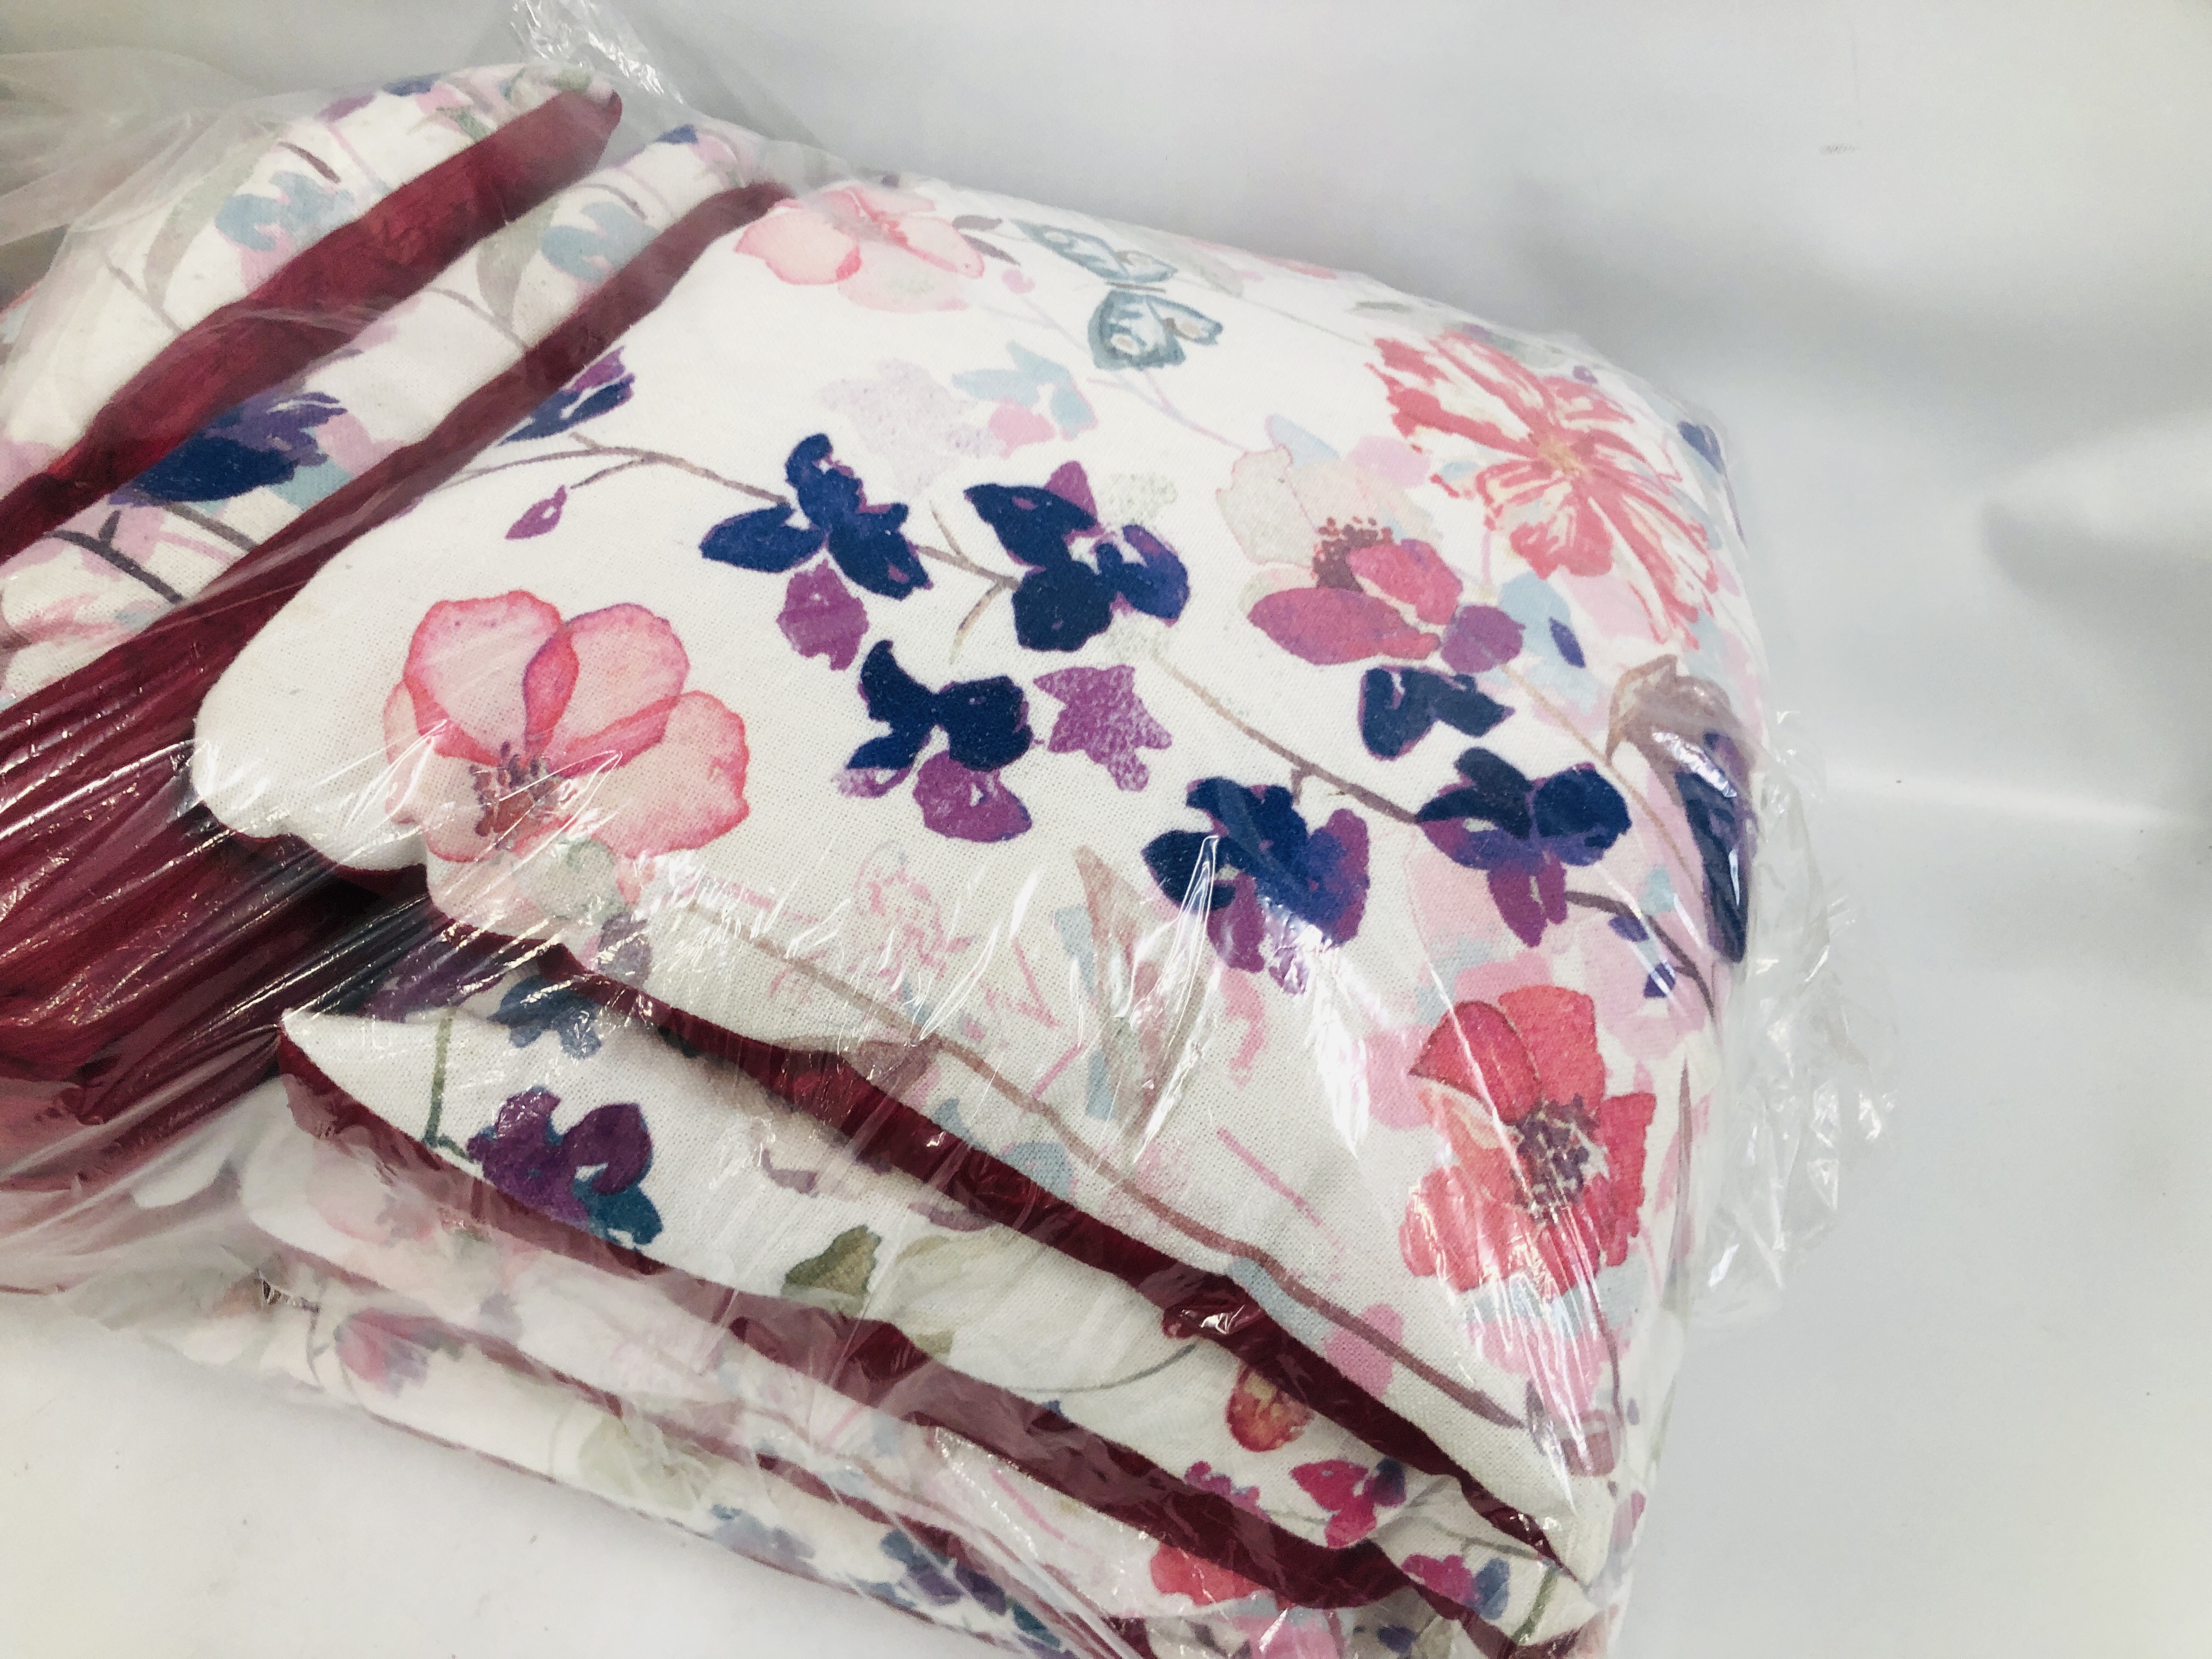 SIX MATCHING SATIN AND FABRIC BUTTERFLY / FLORAL DECORATED CUSHIONS AND THREE STRIPED CUSHIONS. - Image 3 of 3